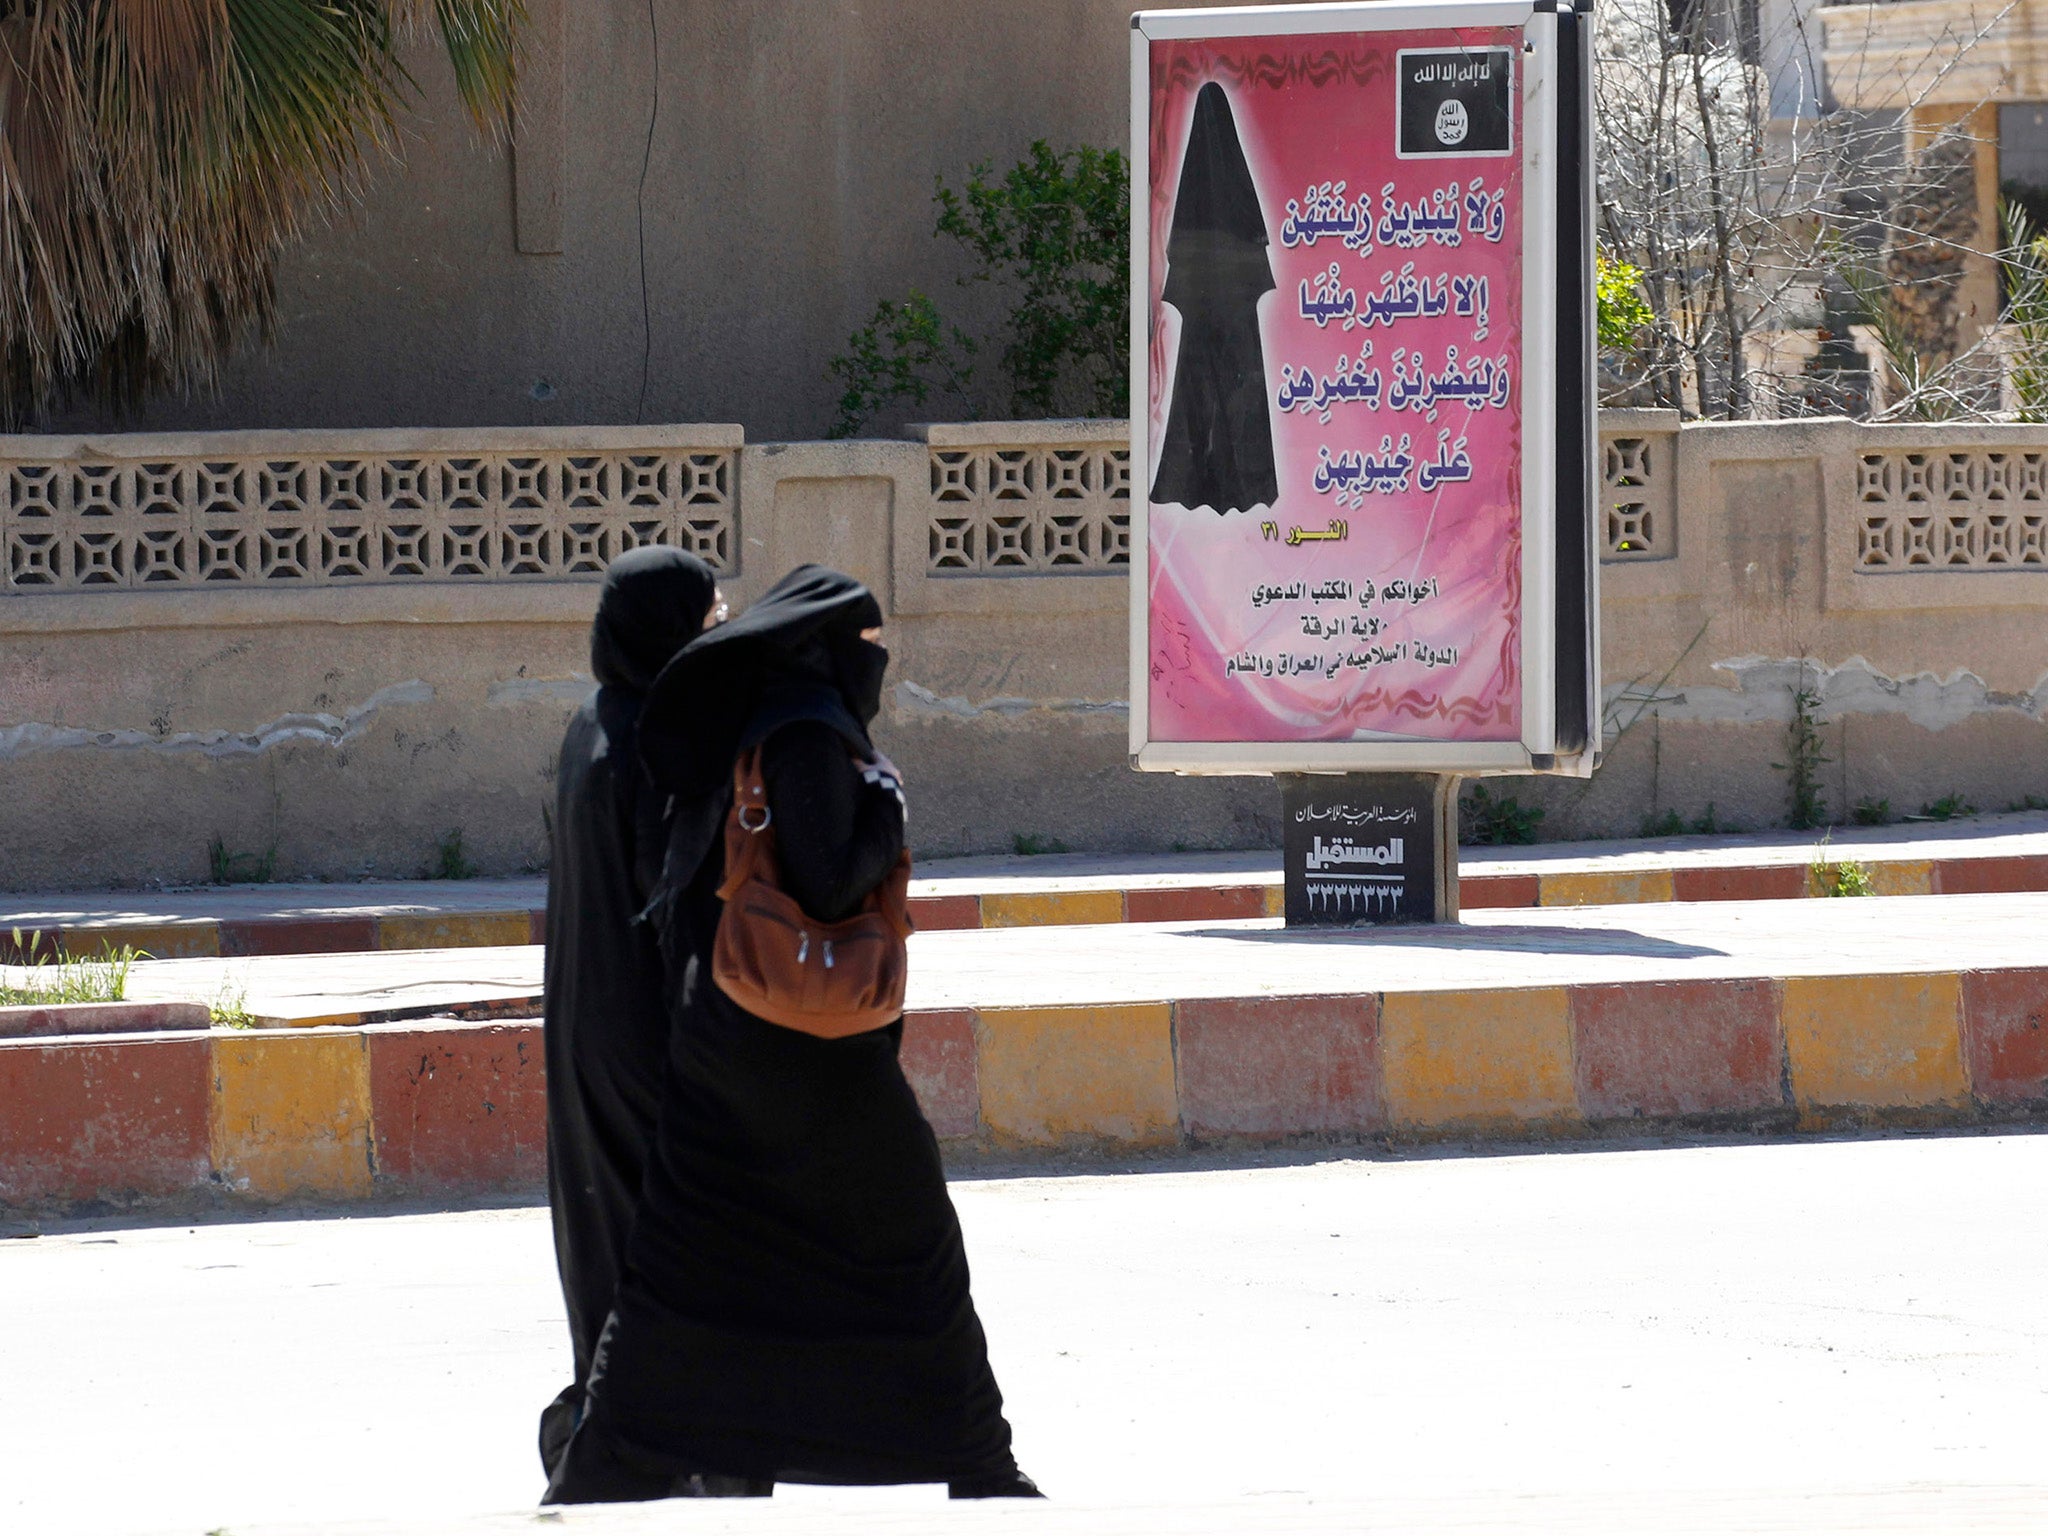 Veiled women walk past a billboard that carries a verse from Koran urging women to wear a hijab in the northern province of Raqqa (REUTERS/Stringer)